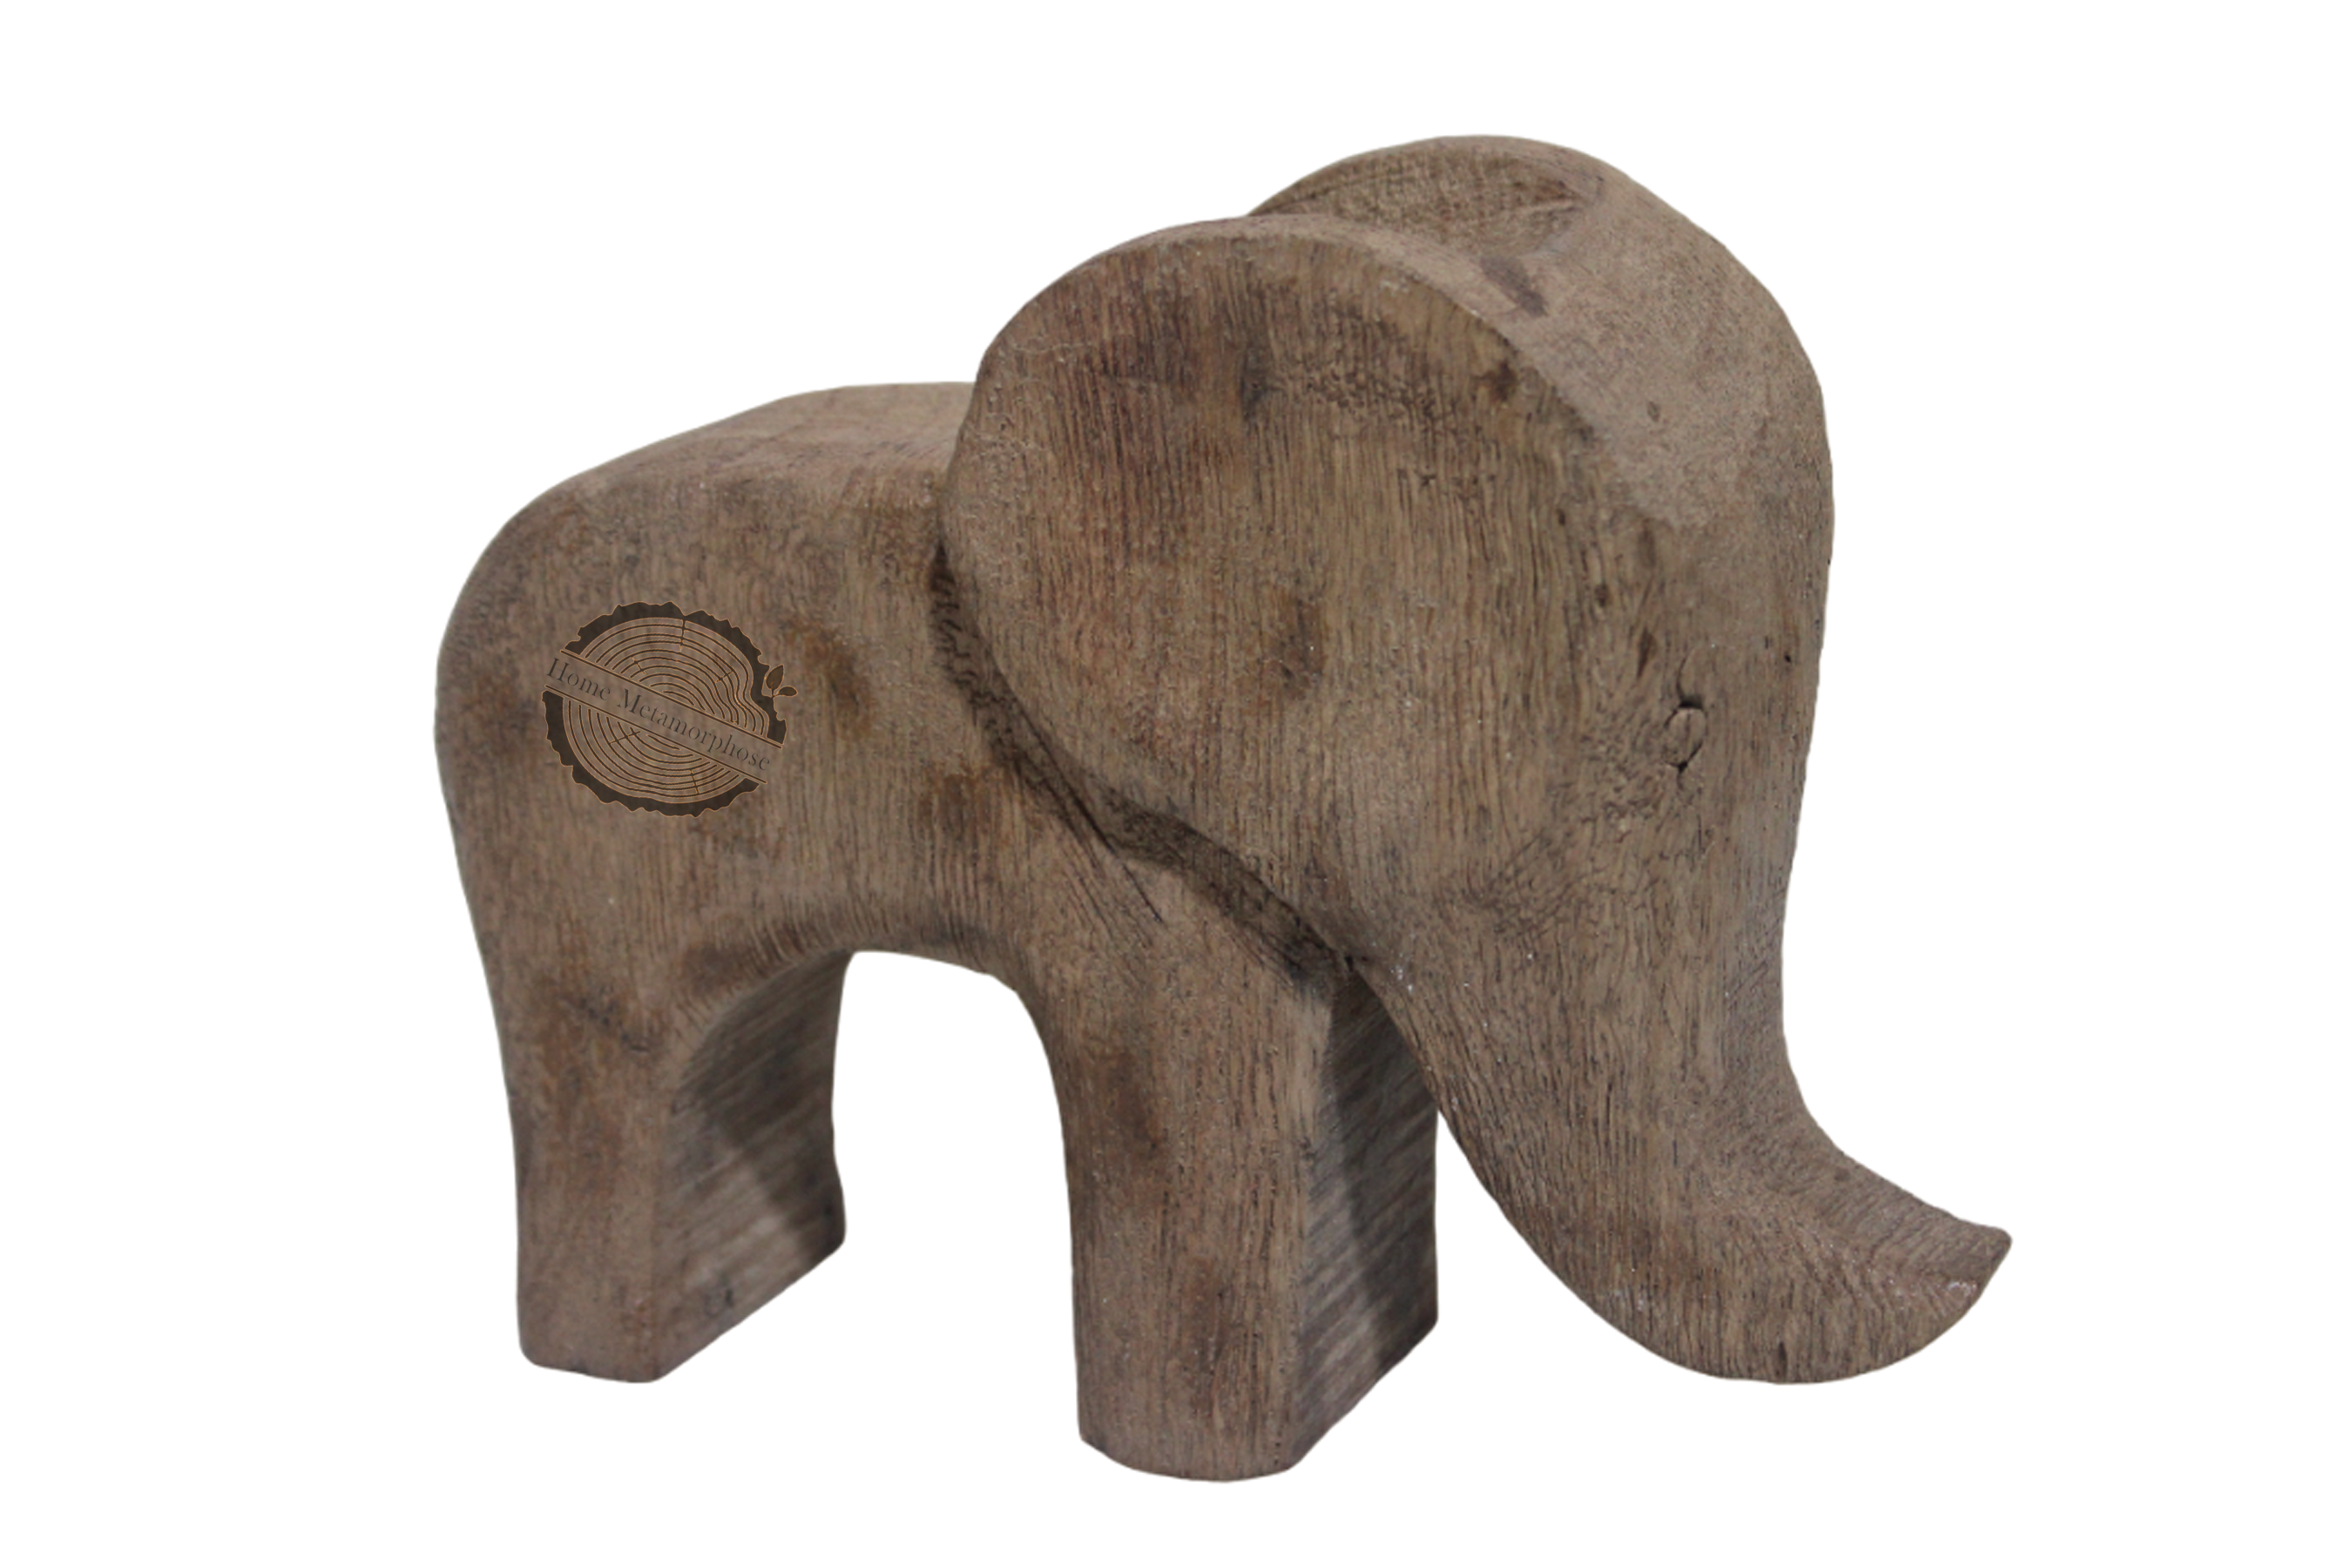 Wooden Elephant Table Décor And Paperweight, Decorative Table Accent And Functional Table Decor, Shelf Decor Gift Item